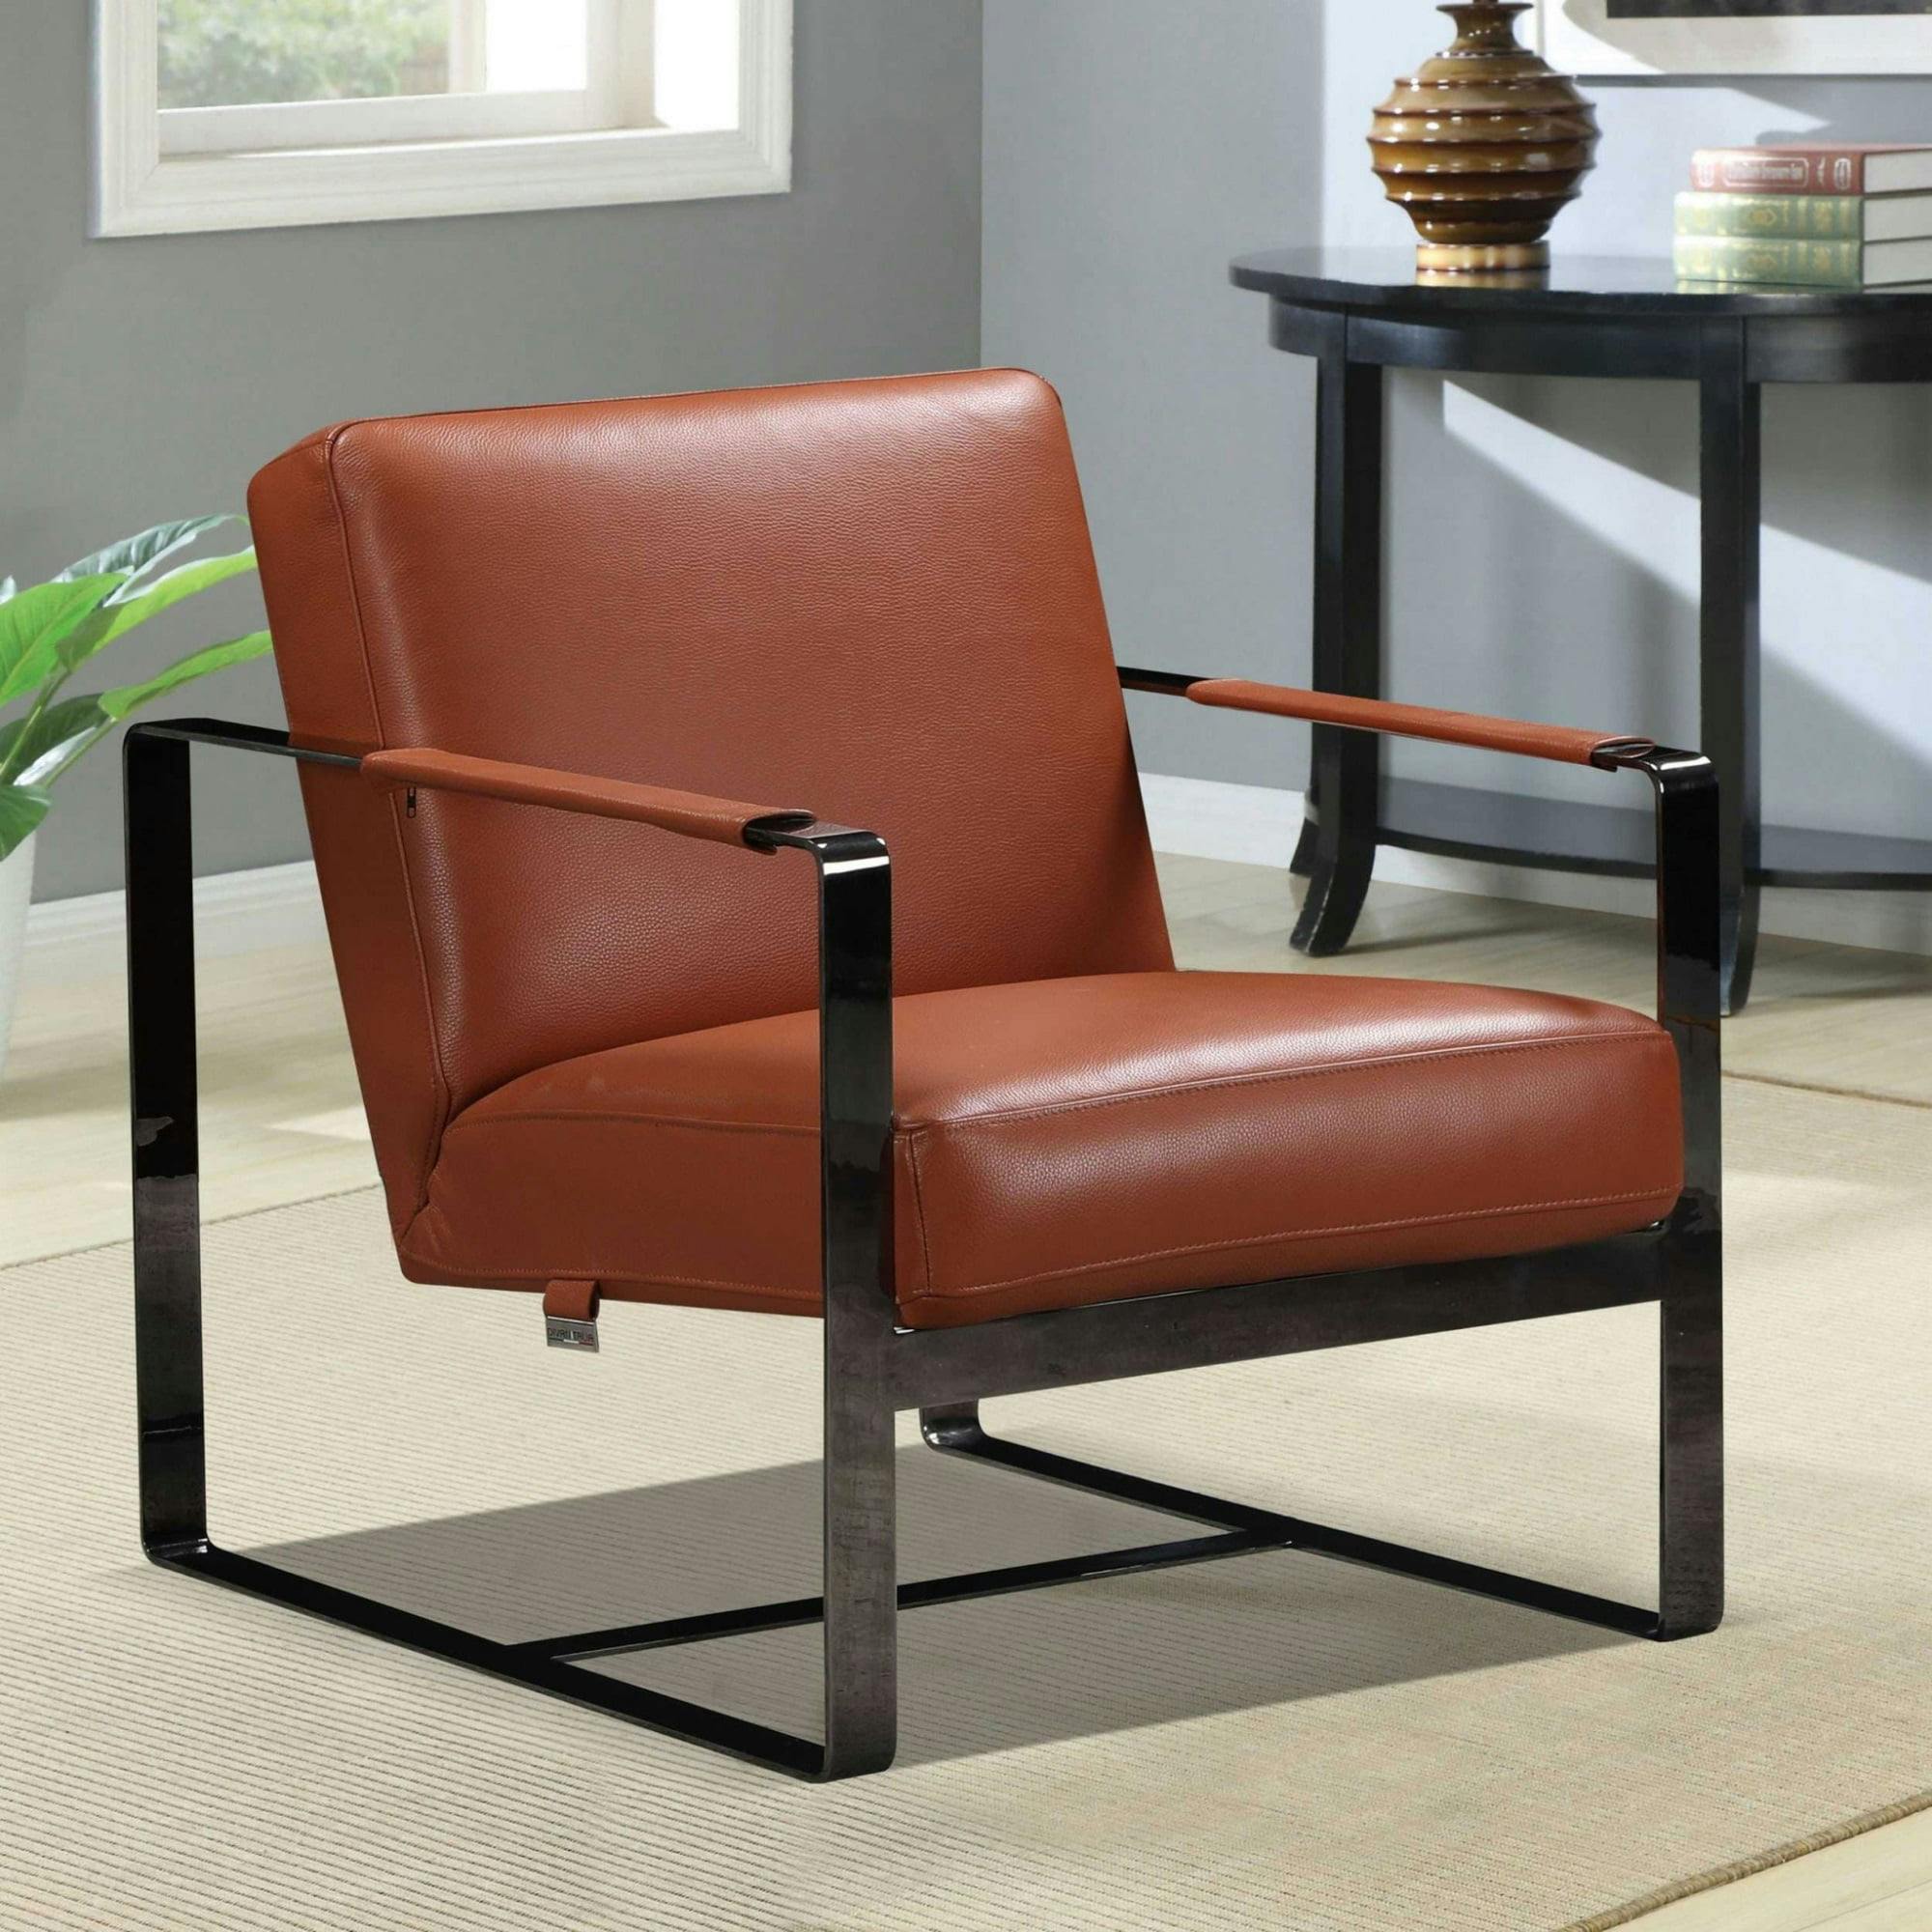 Elegant Camel Leather Accent Chair with Manufactured Wood Frame